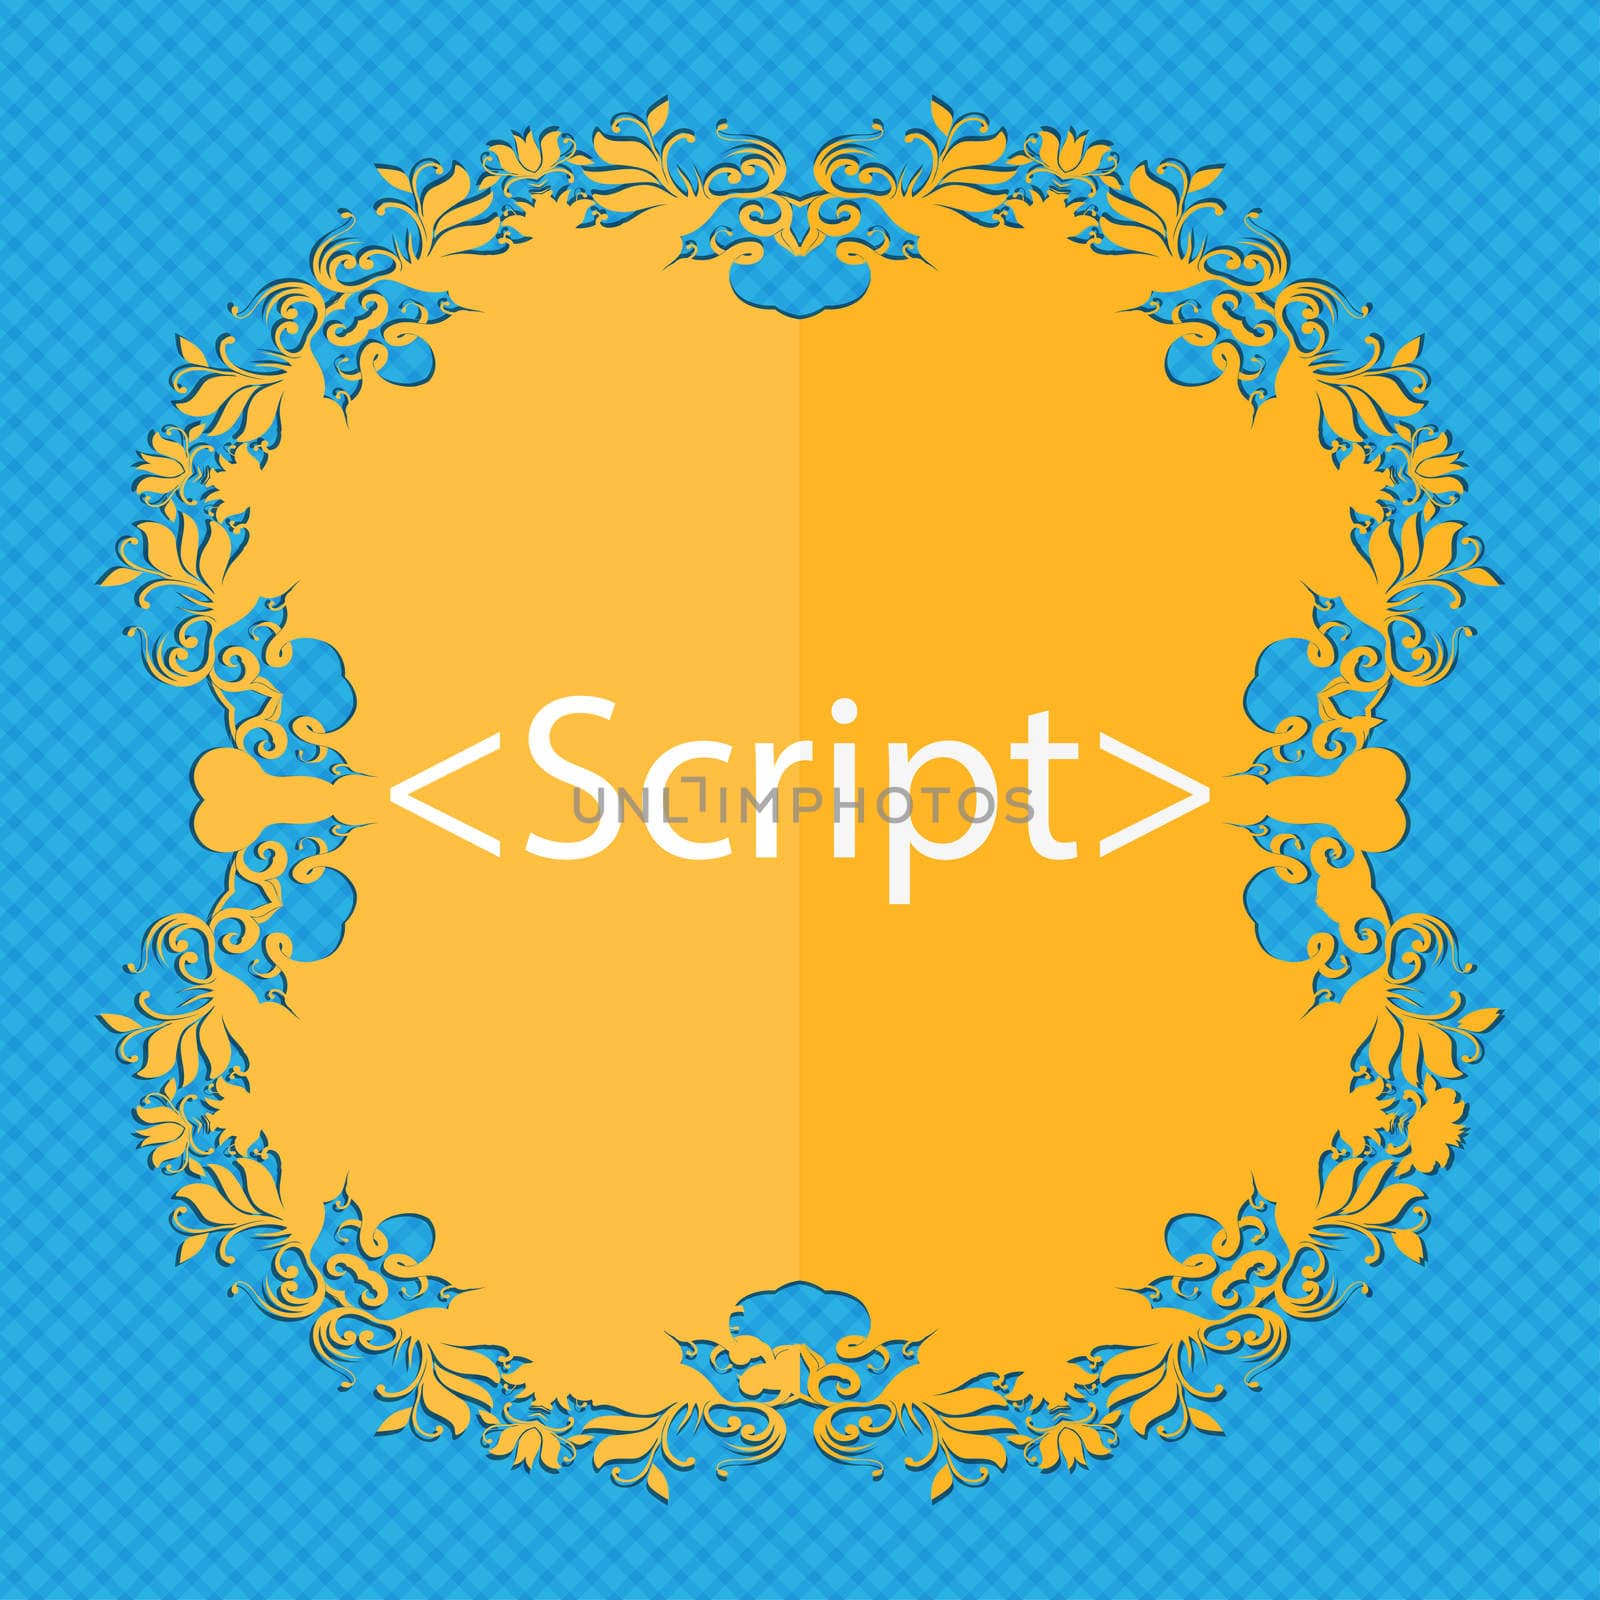 Script sign icon. Javascript code symbol. Floral flat design on a blue abstract background with place for your text. illustration